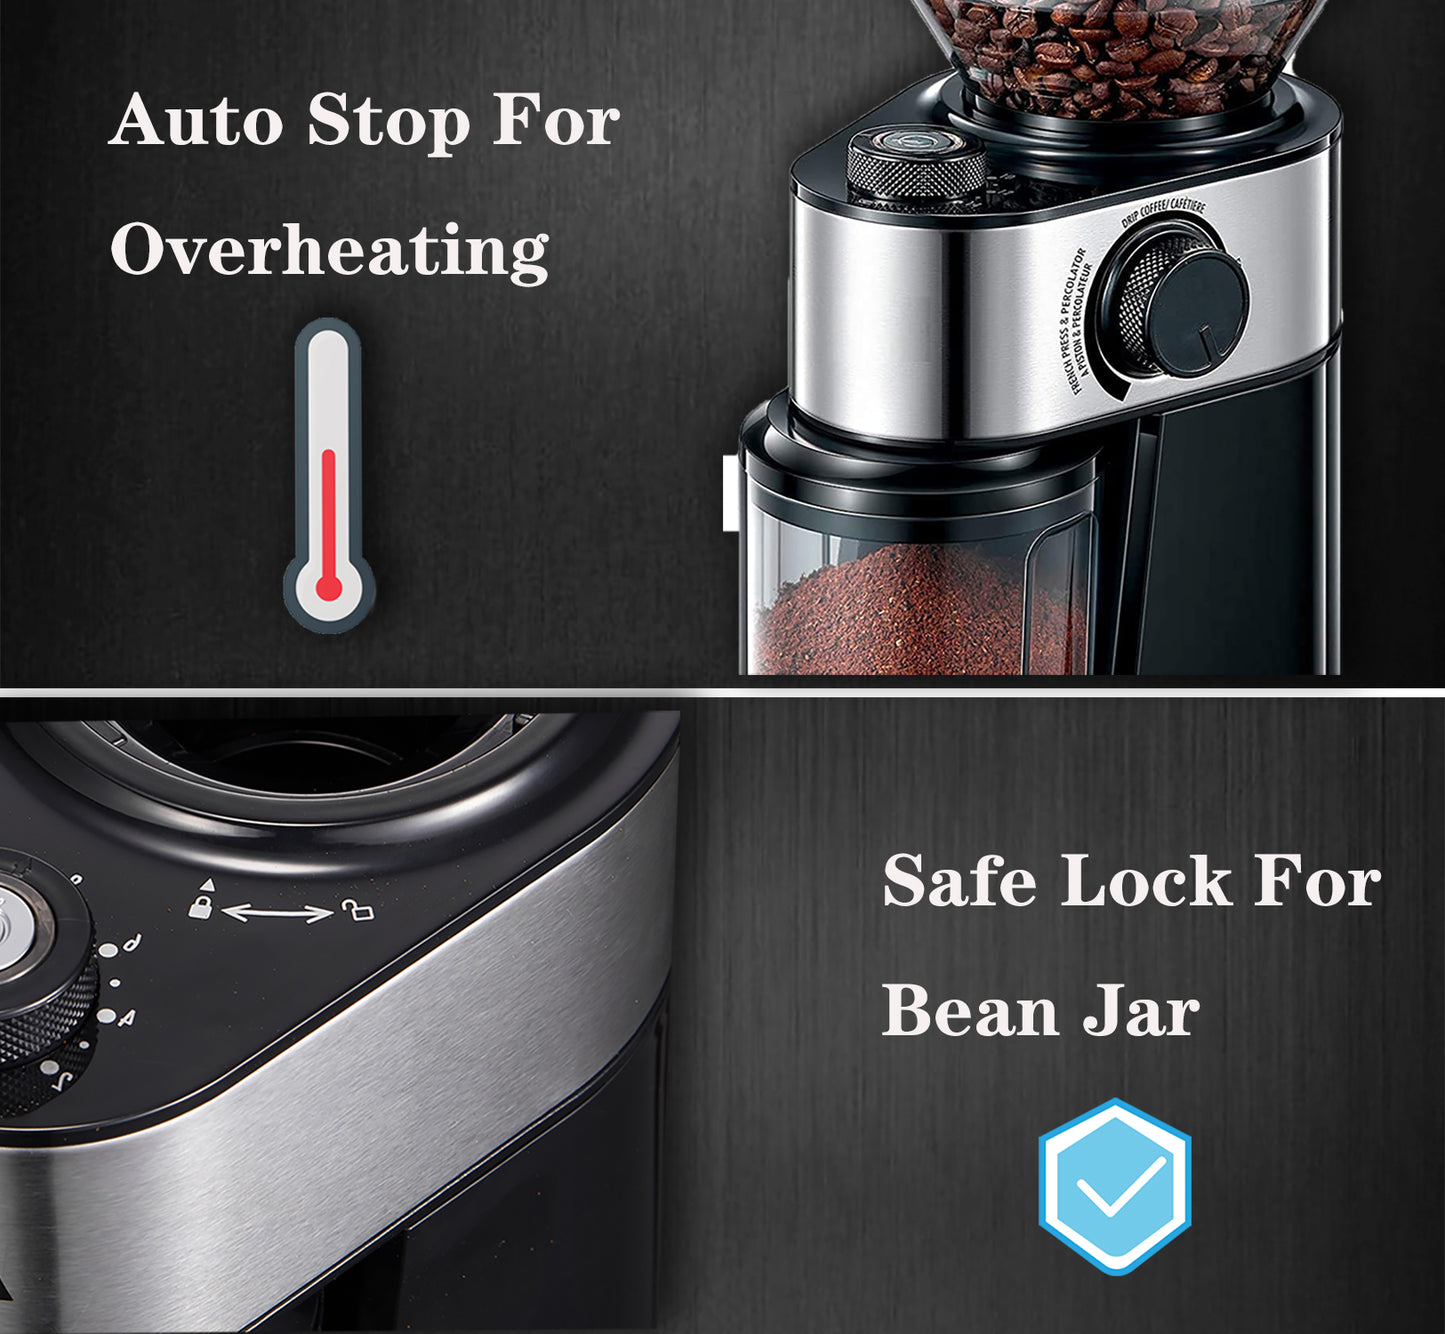 Electric Burr Mill Coffee Grinder with 18 Precise Grind Settings for Espresso, Drip and French Press - Adjustable Burr Grinder in Black